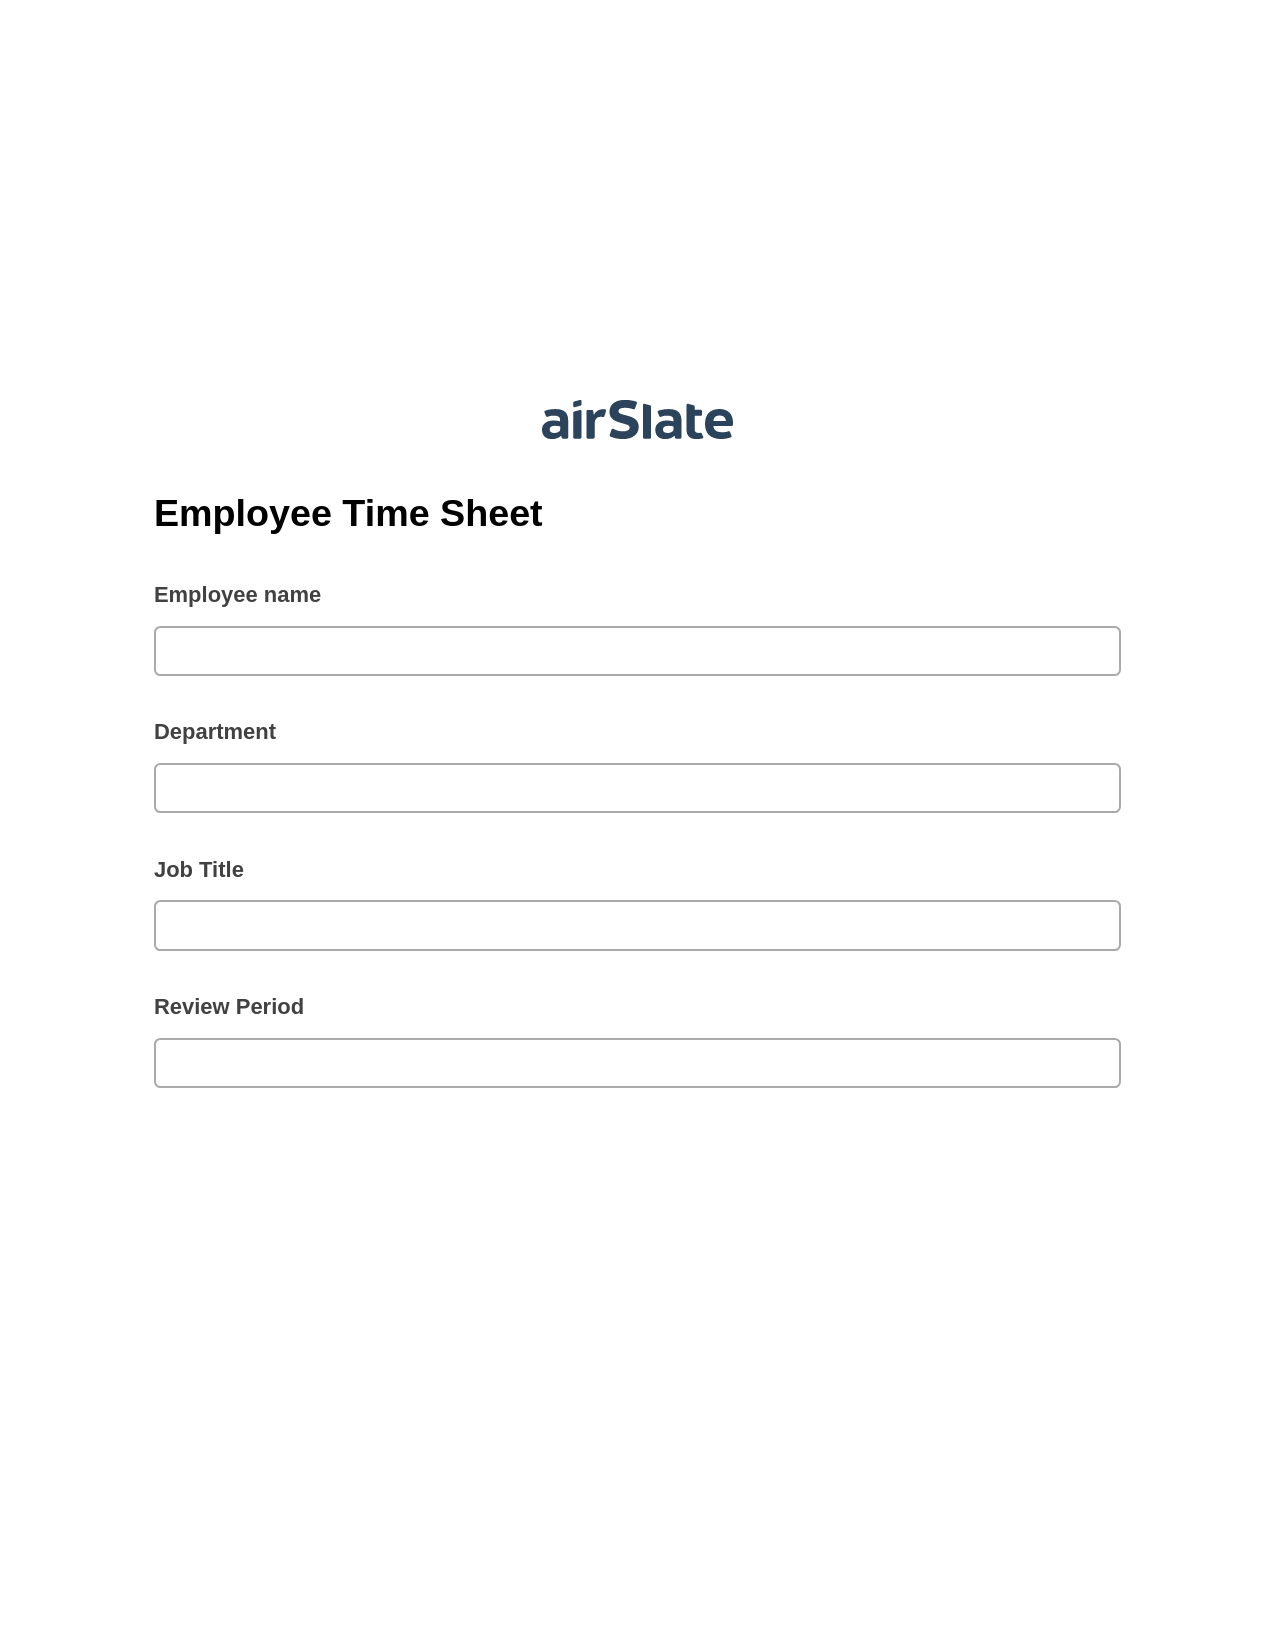 Employee Time Sheet Pre-fill from Smartsheet Bot, Update Audit Trail Bot, Archive to OneDrive Bot